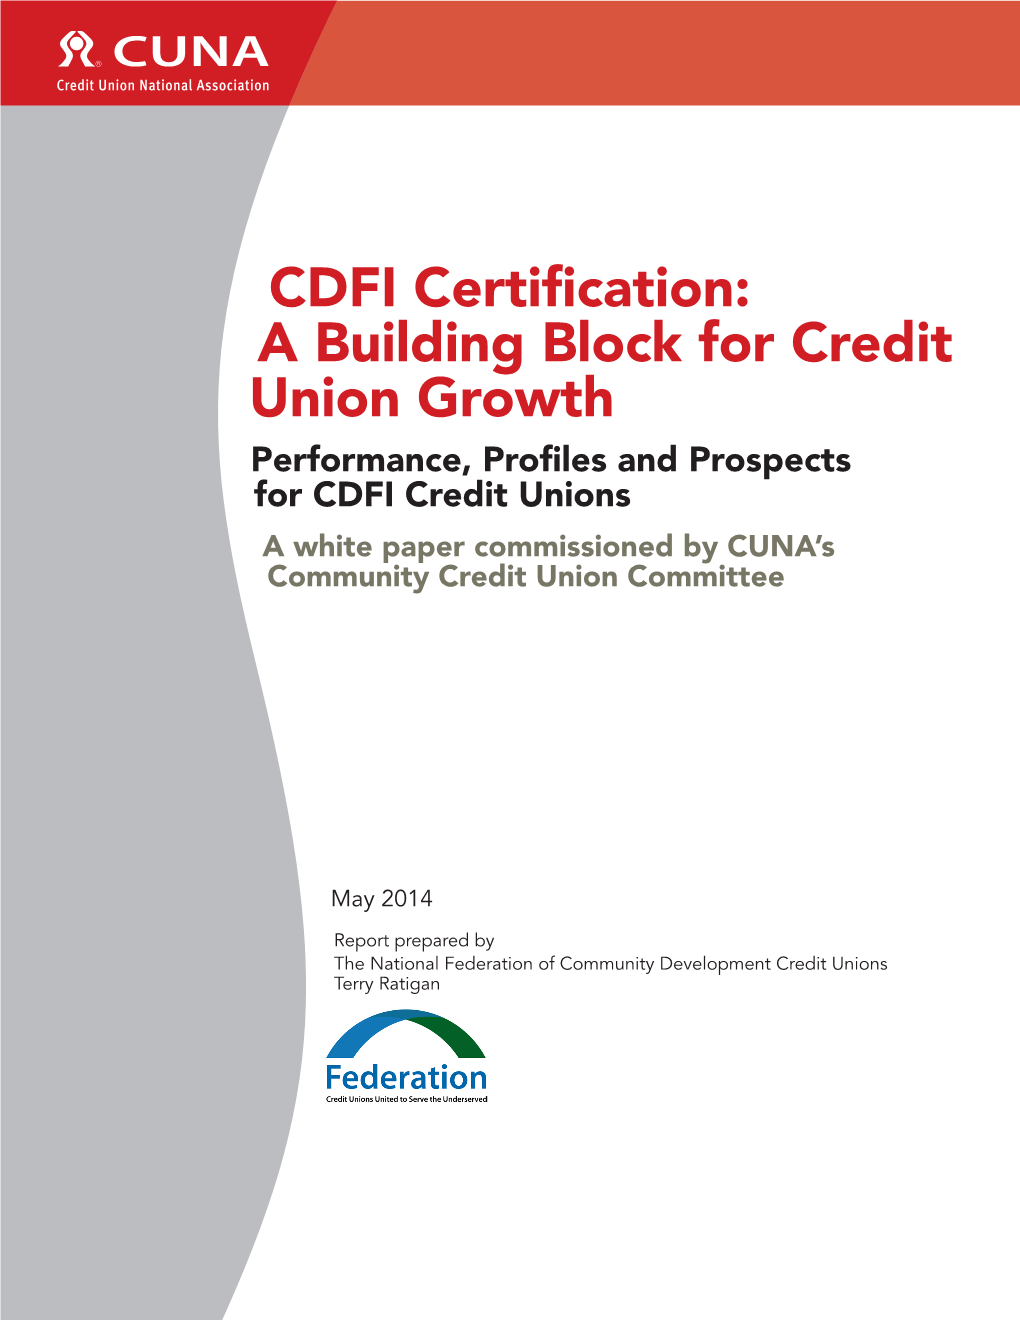 CDFI Certification: a Building Block for Credit Union Growth